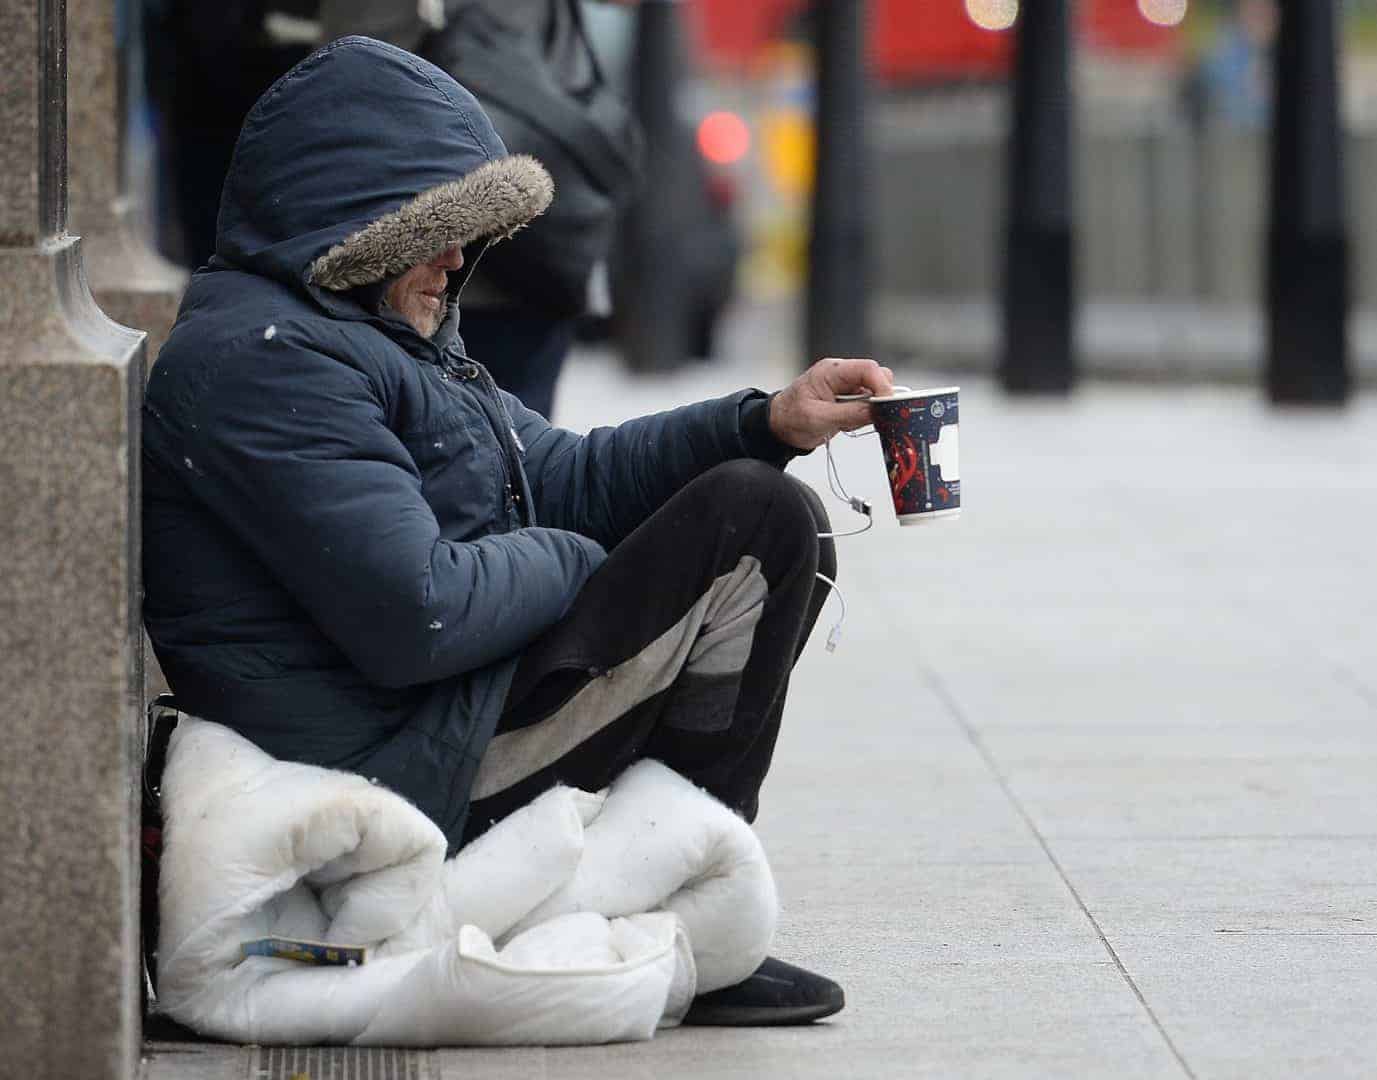 Government asks councils to house all rough sleepers by weekend